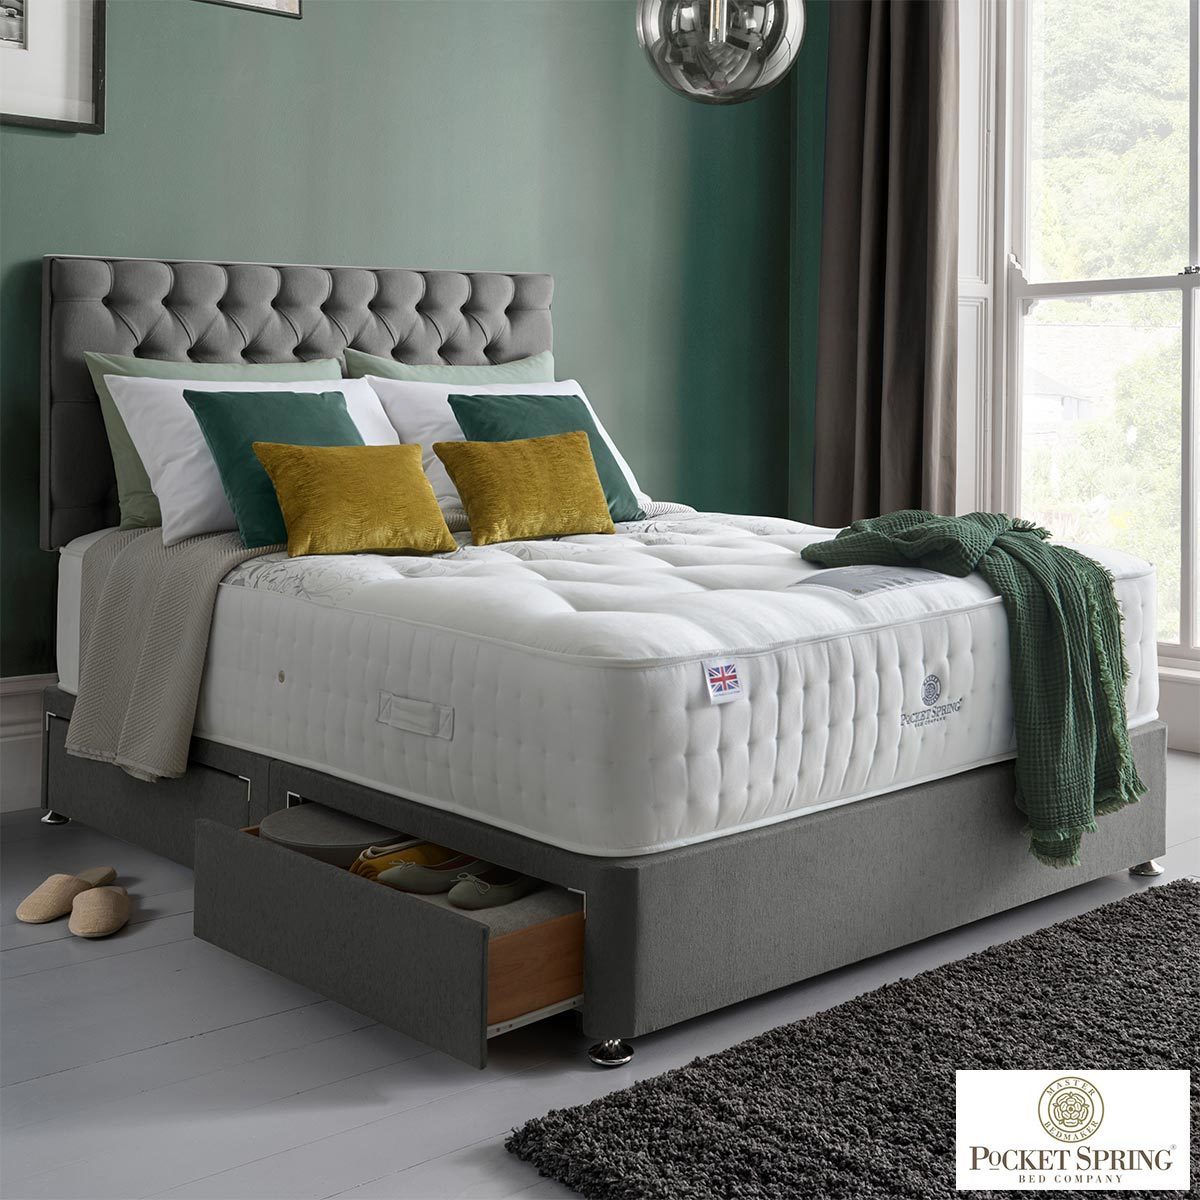 Pocket Spring Bed Company Mulberry Mattress & Grey Divan with 4 Drawers in 3 Sizes - Signature Retail Stores